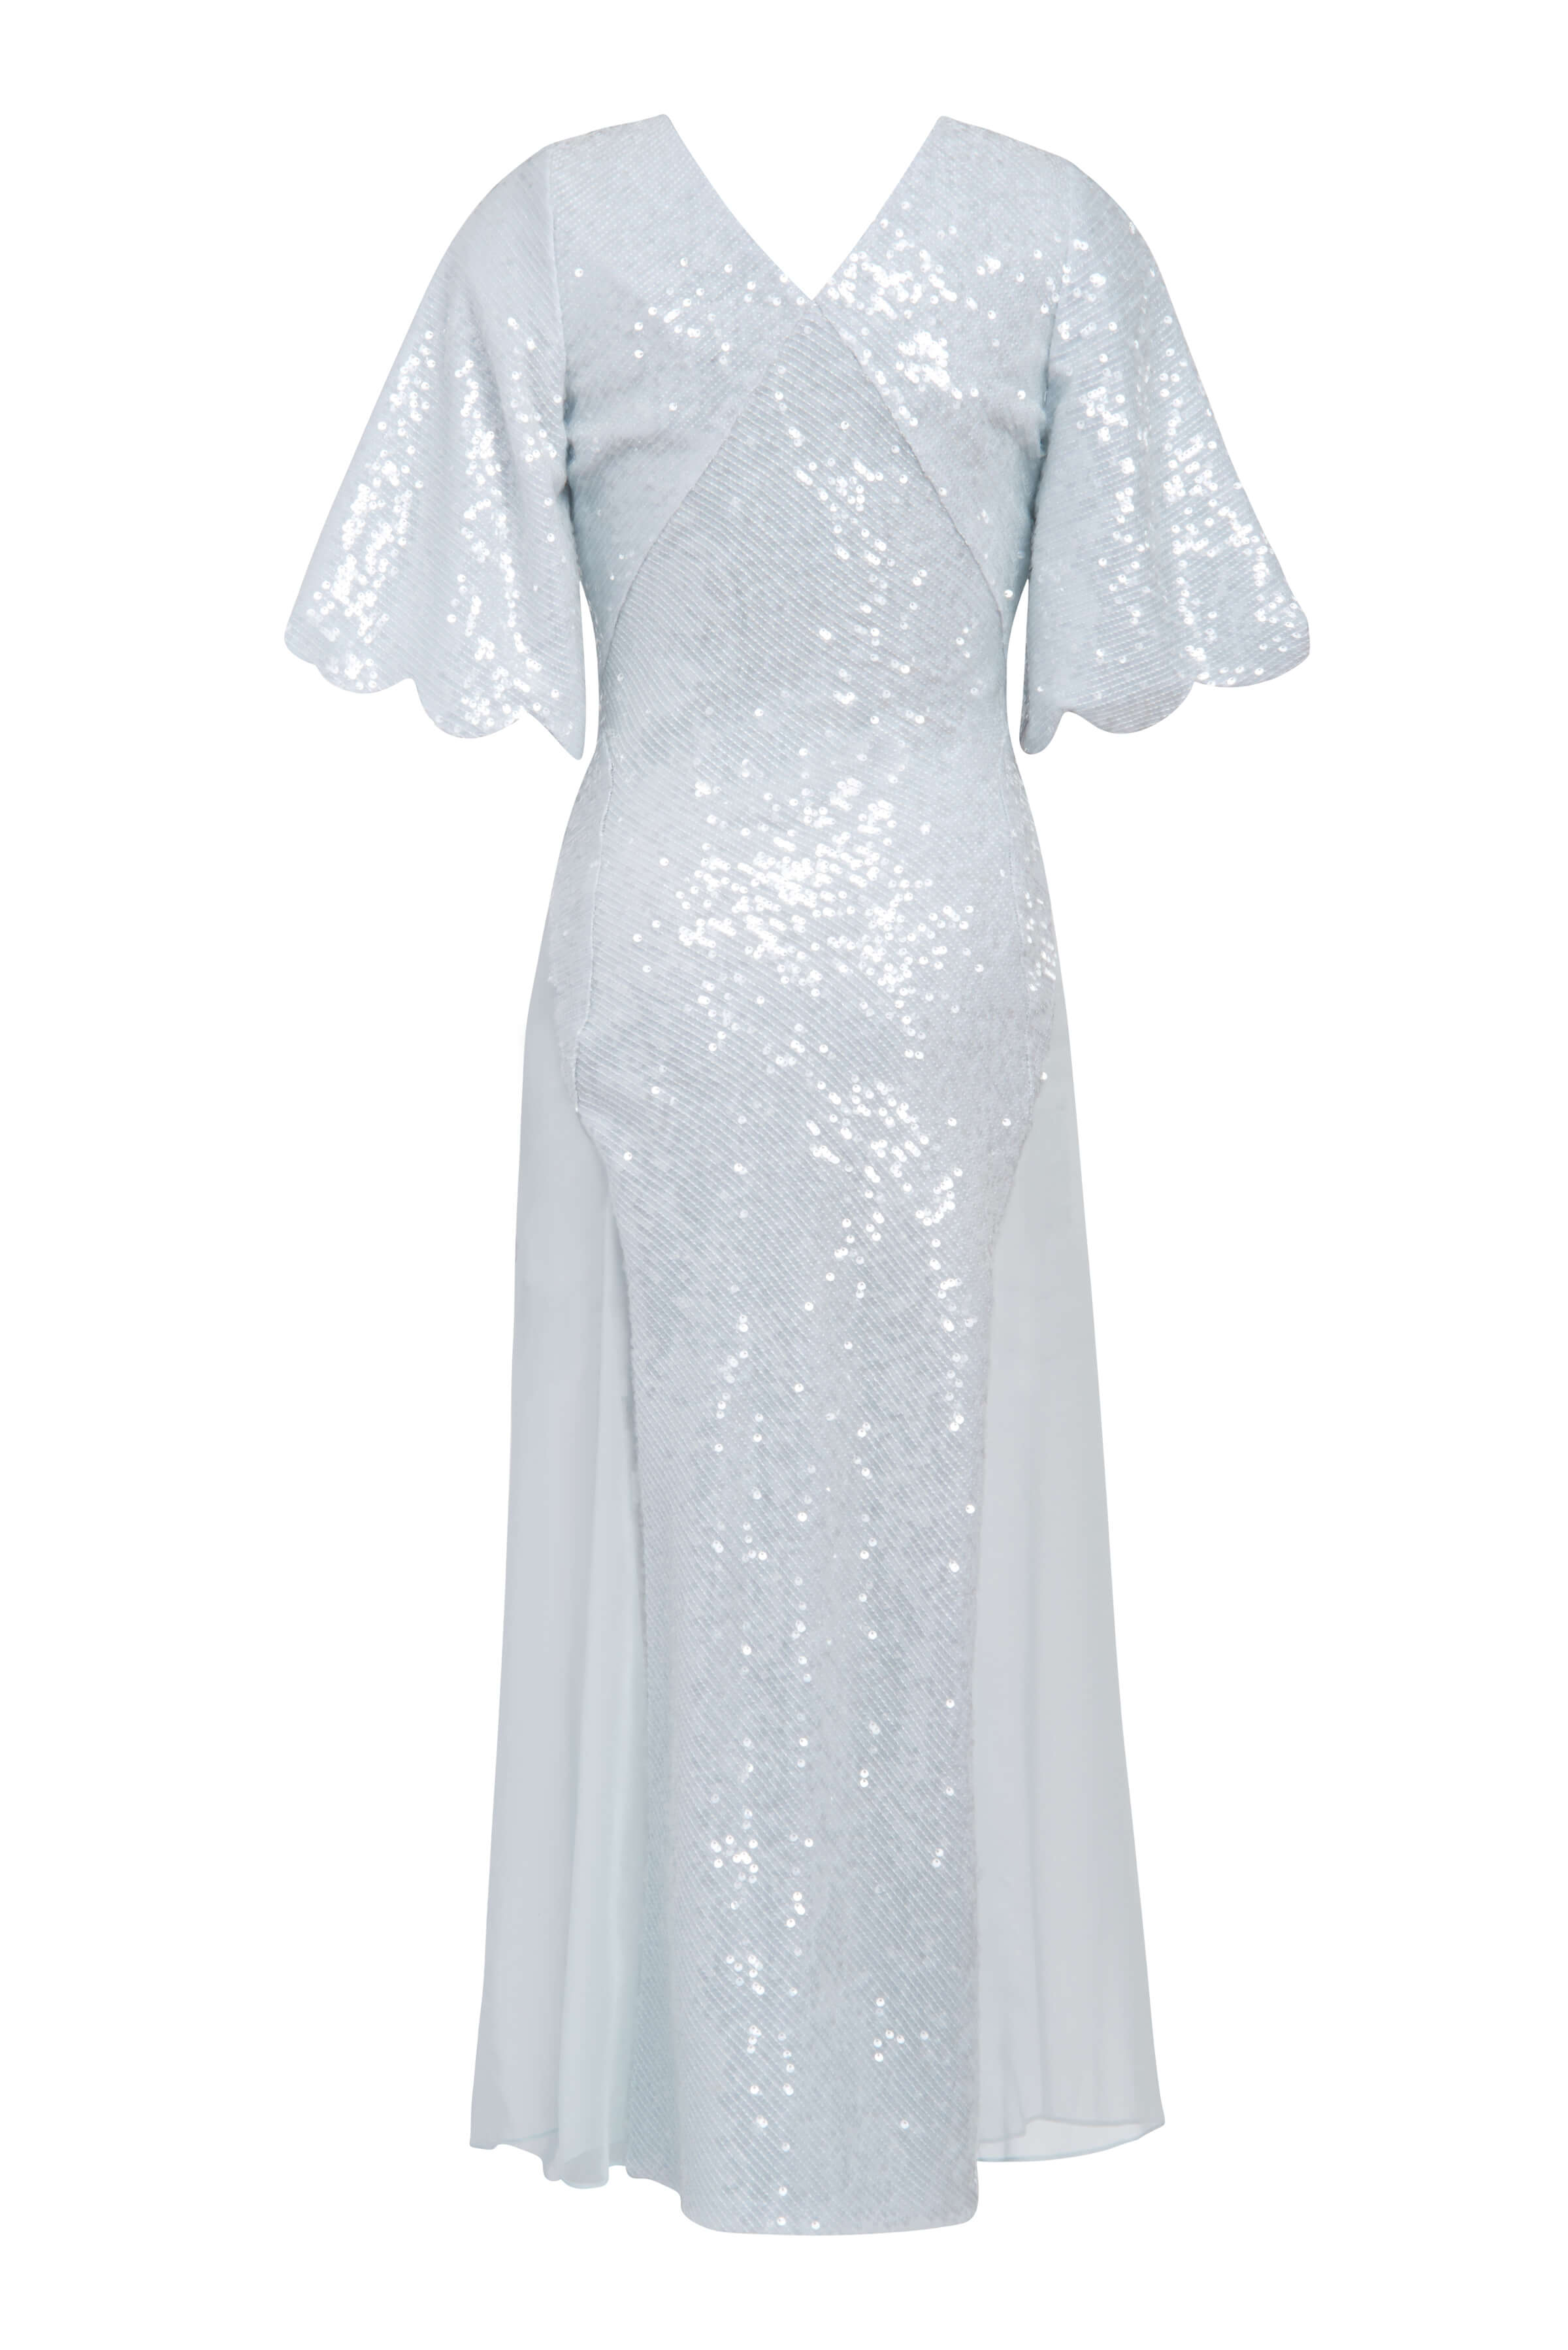 Emeline Light Blue Sequin Midi Dress With Scalloped Sleeves And Chiffon Panels